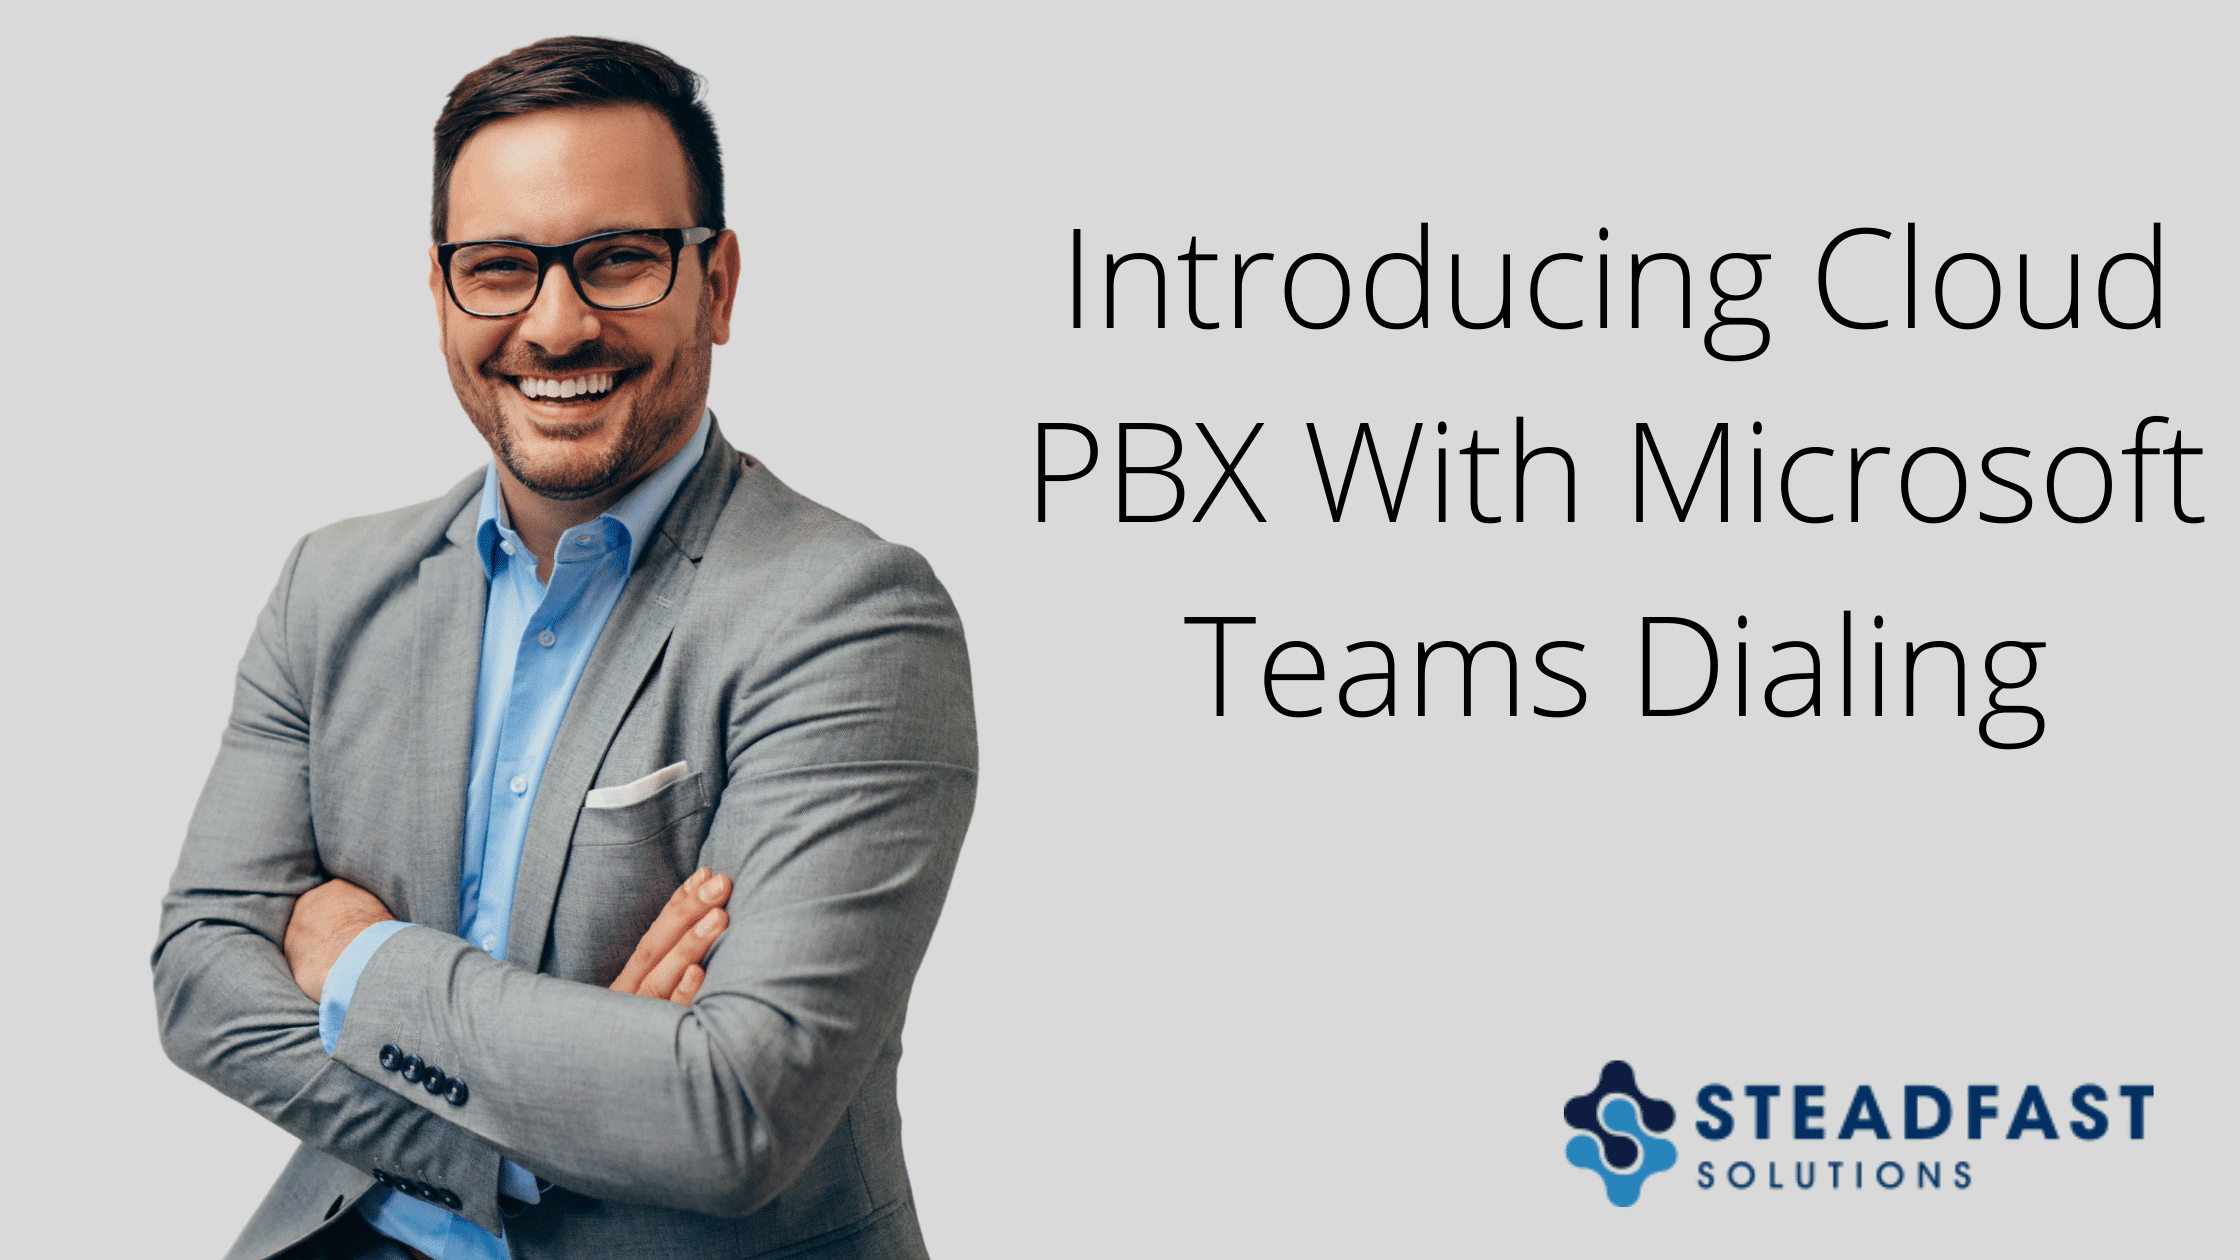 Cloud PBX With Microsoft Teams Dialing